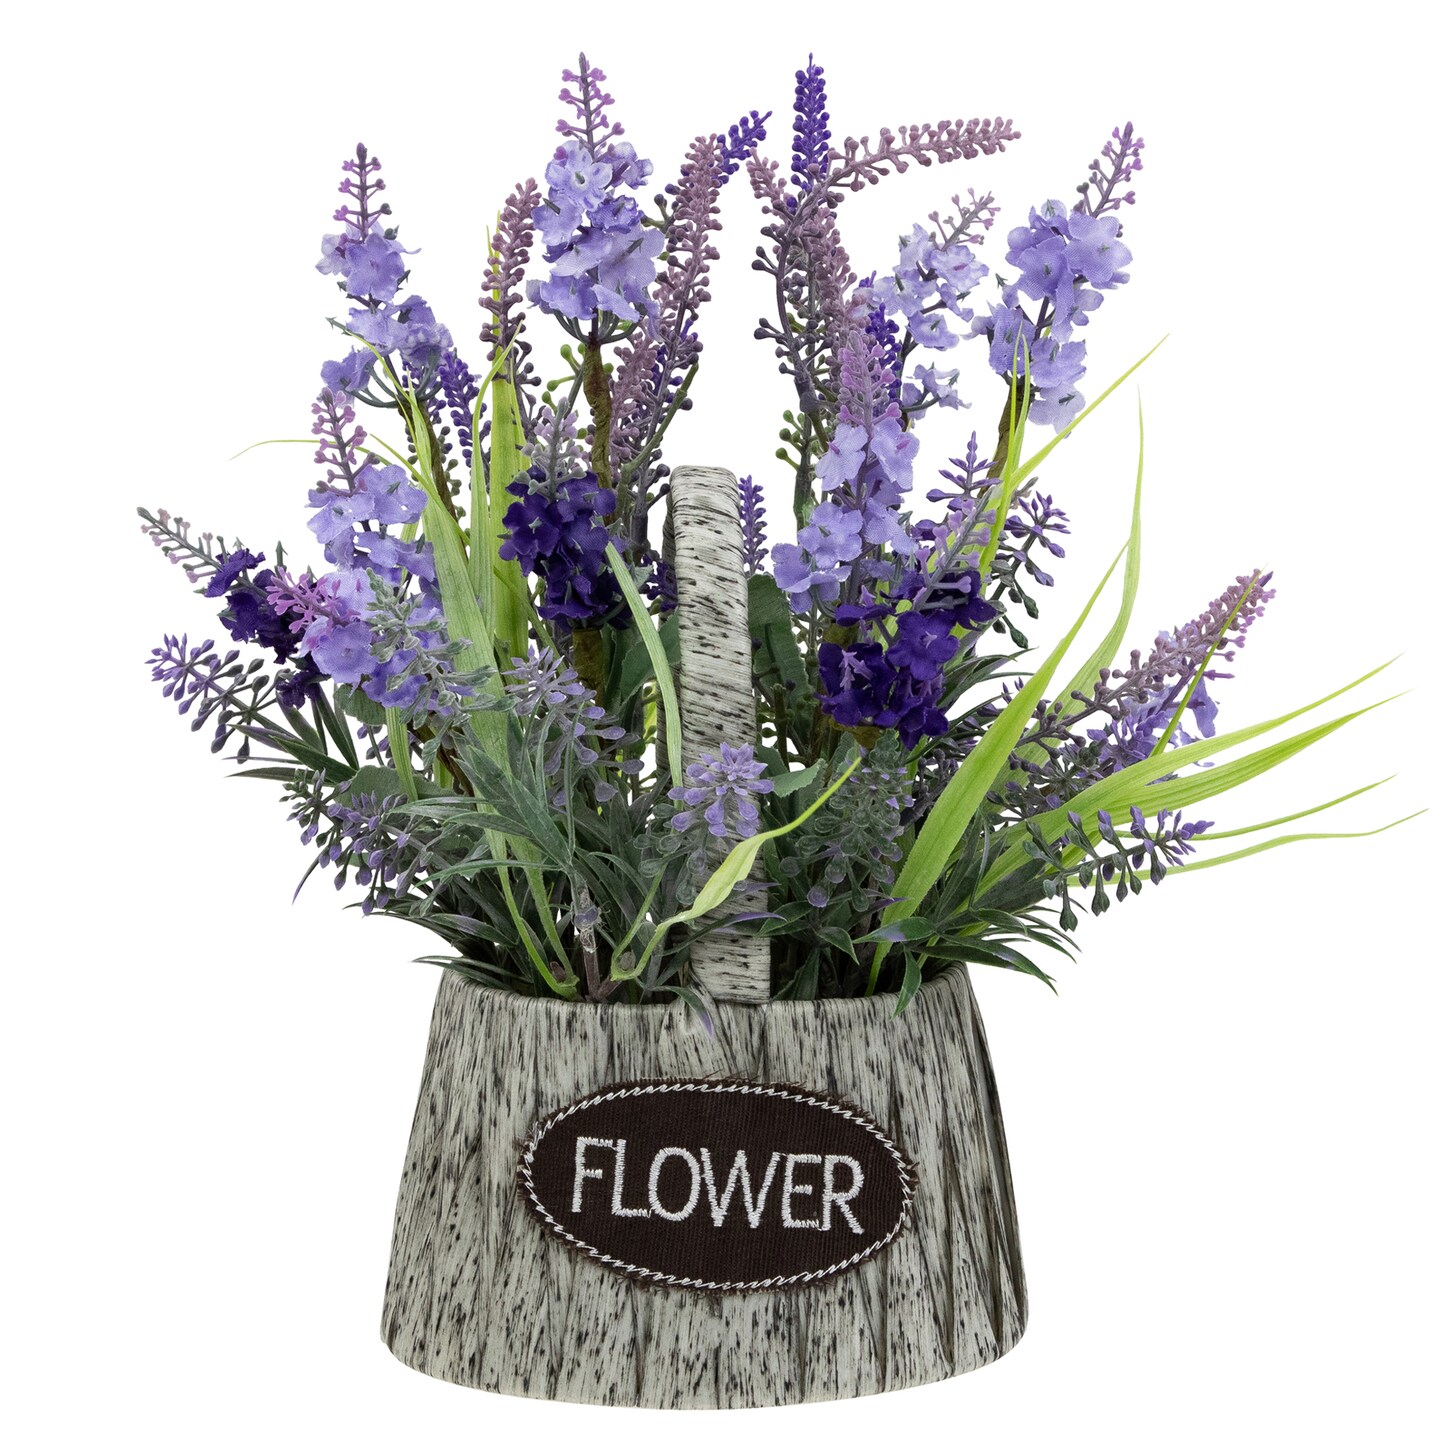 Northlight Lavender Bouquet in &#x22;Flower&#x22; Spring Basket with Handle - 12&#x22;